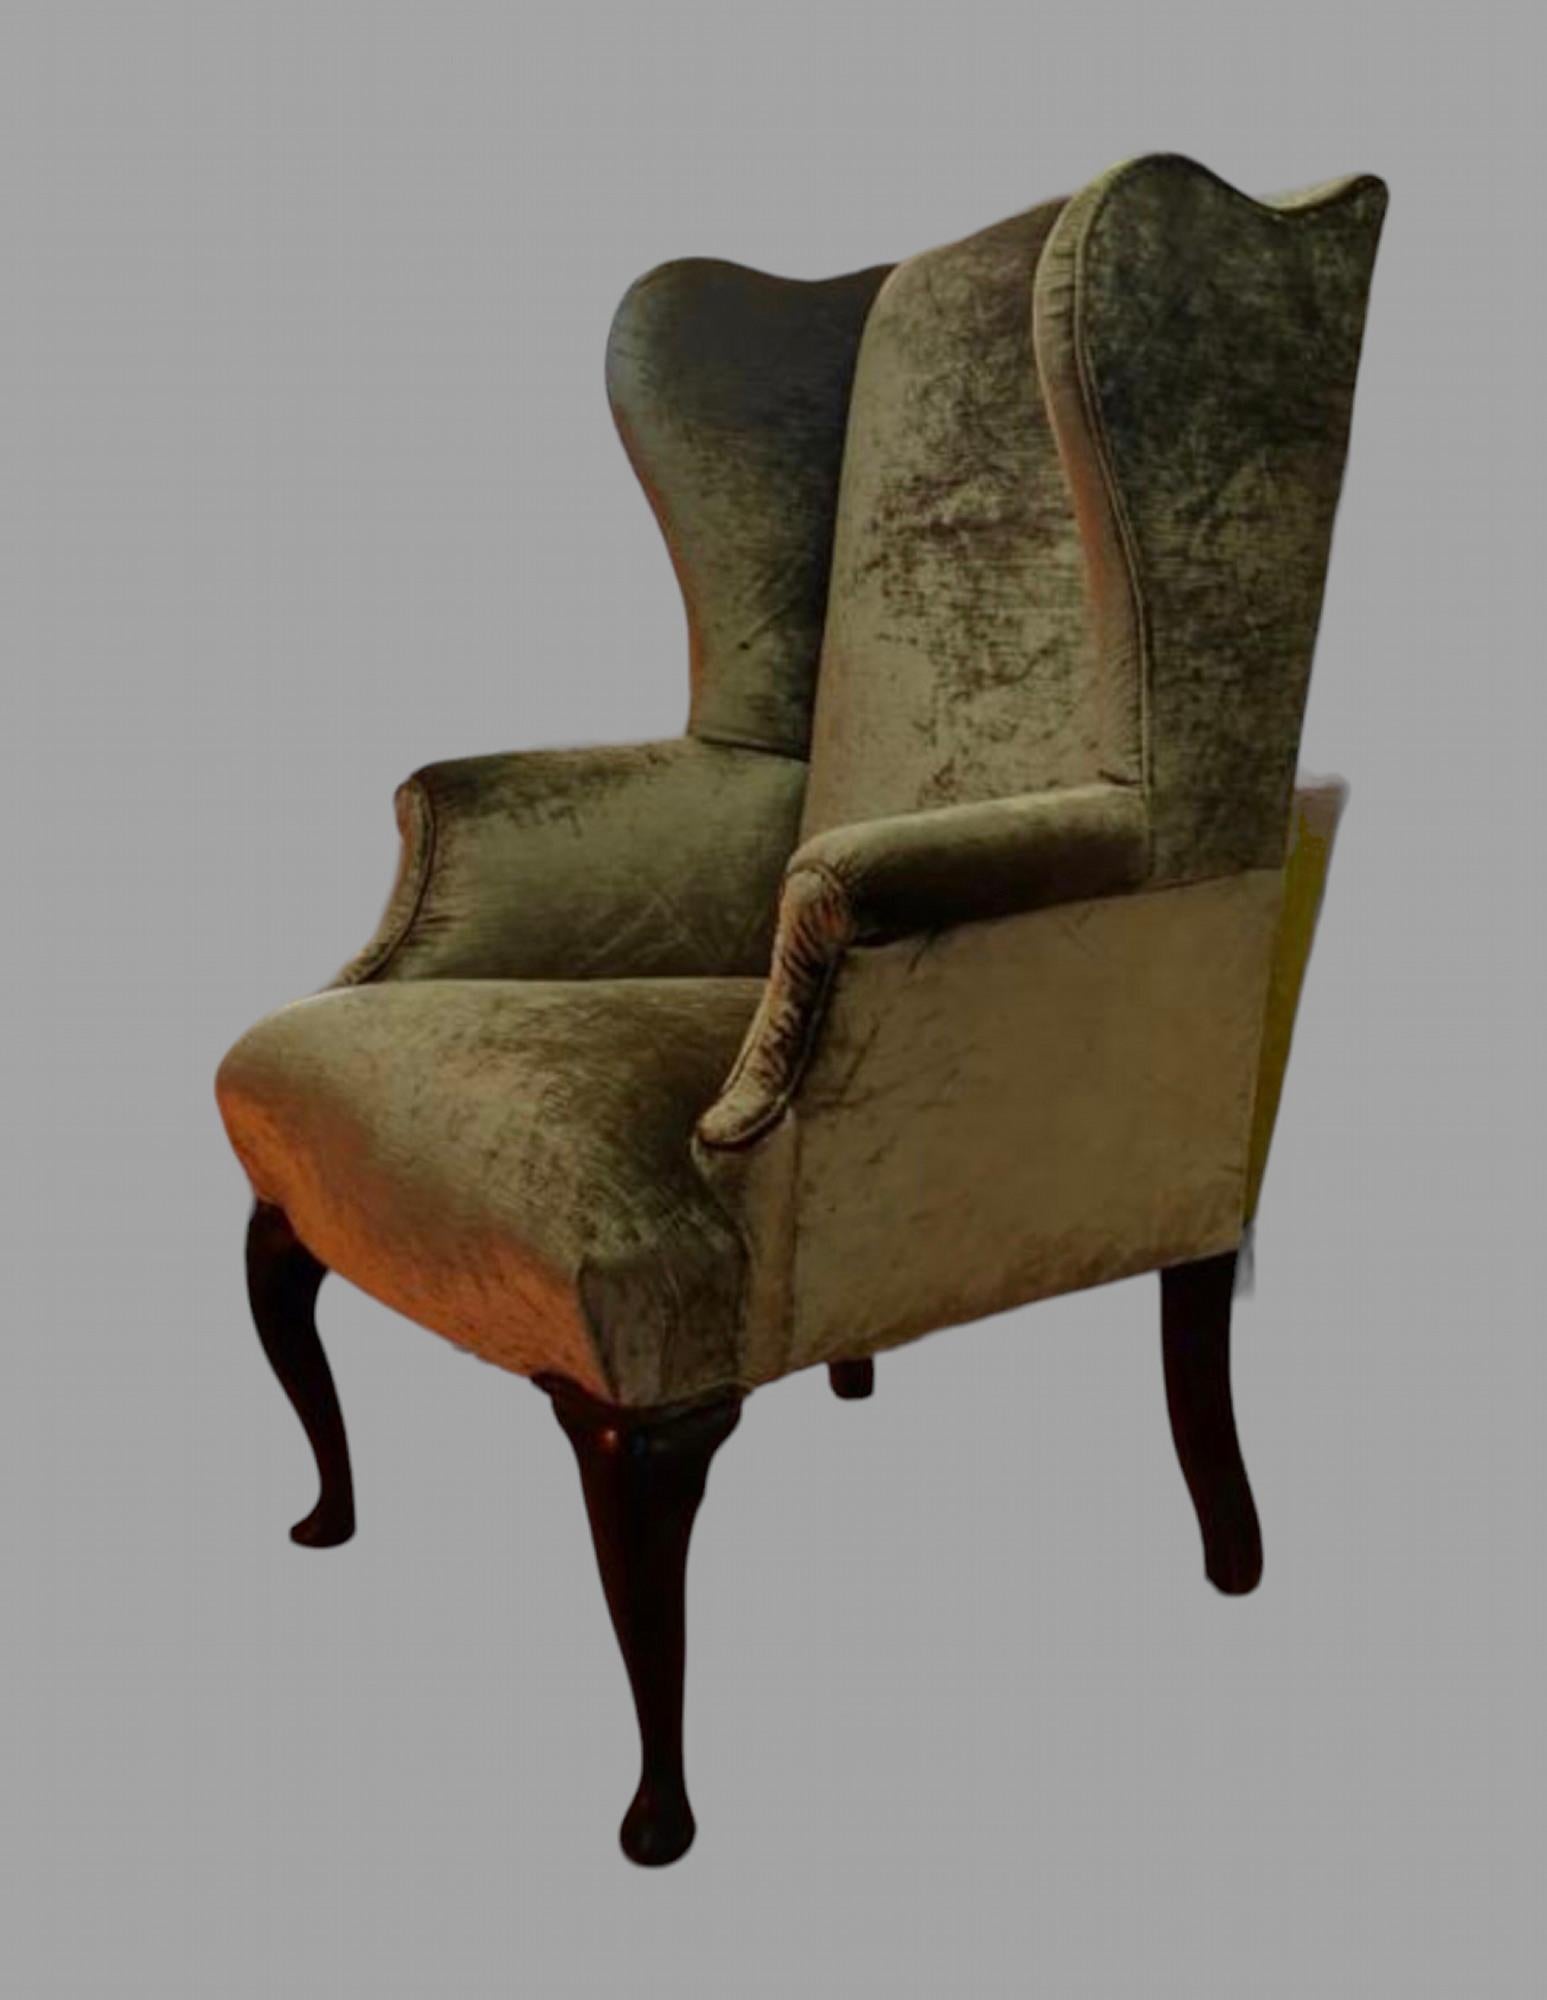 A Late Georgian Mahogany Wingback Chair with Queen Anne Legs reupholstered in GP&J Baker Rossini Velvet.